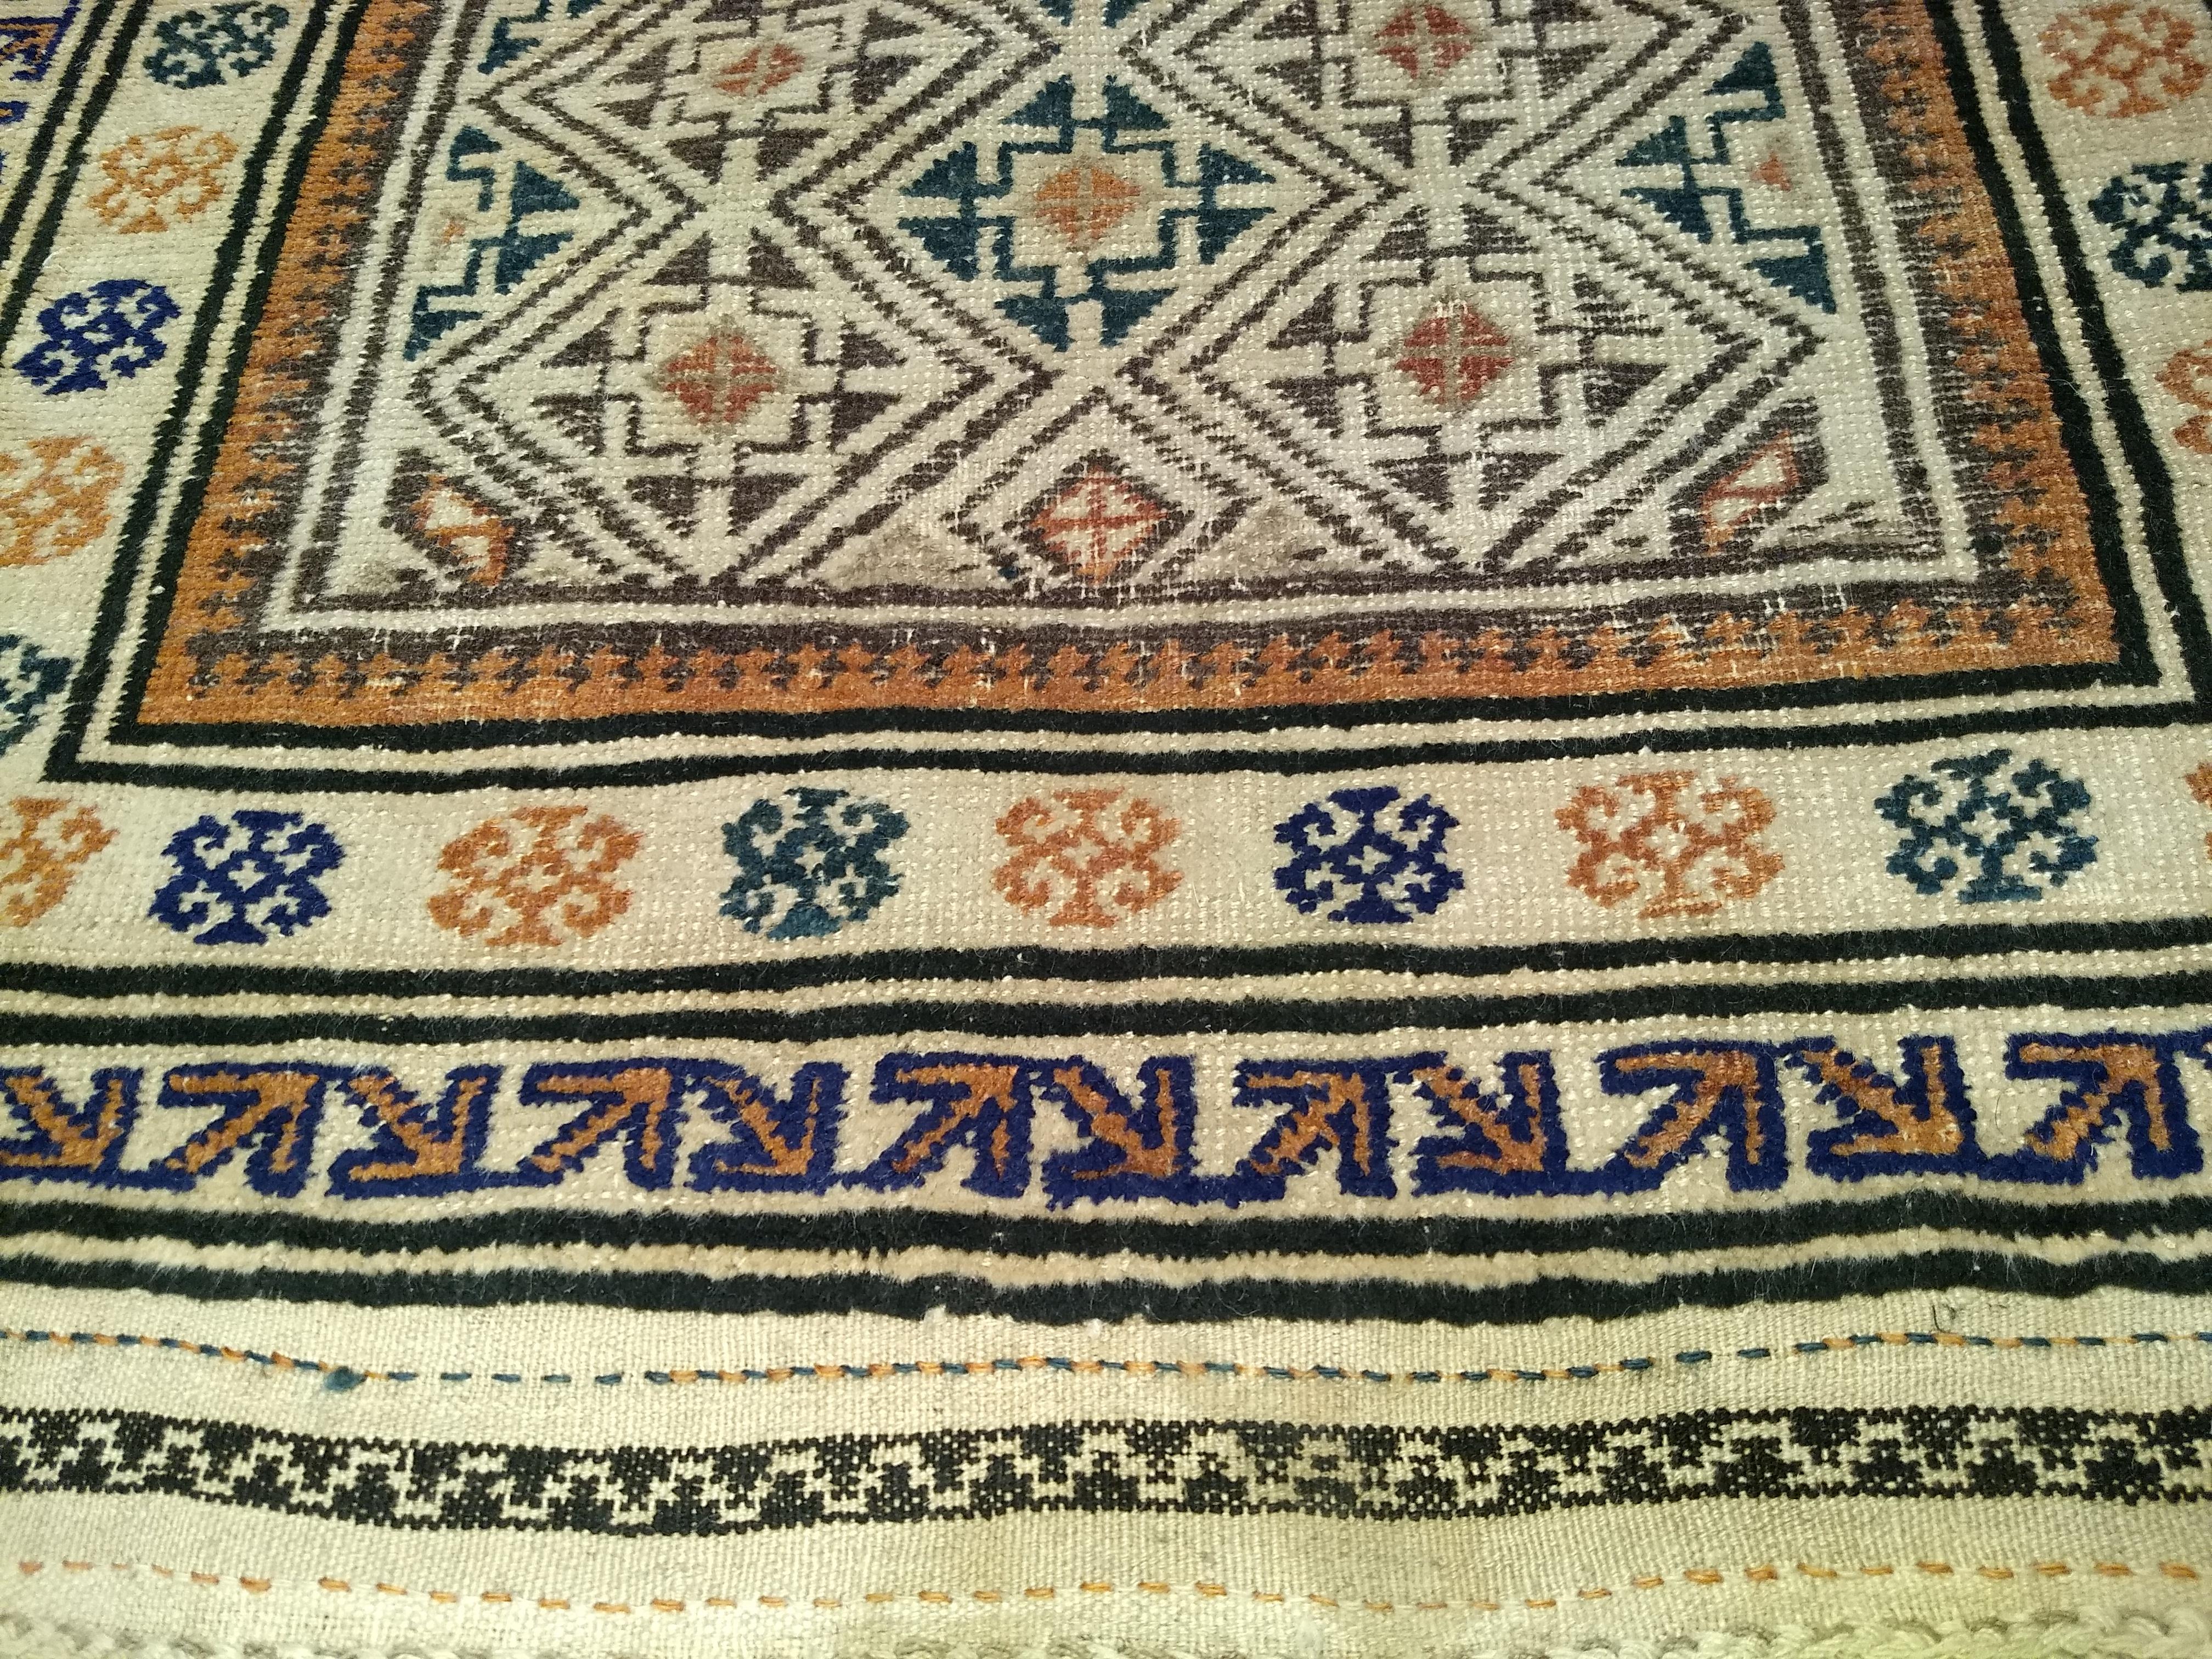 Early 20th Century Persian Baluch Prayer Rug Pattern in Ivory, Brown, Navy Blue For Sale 1